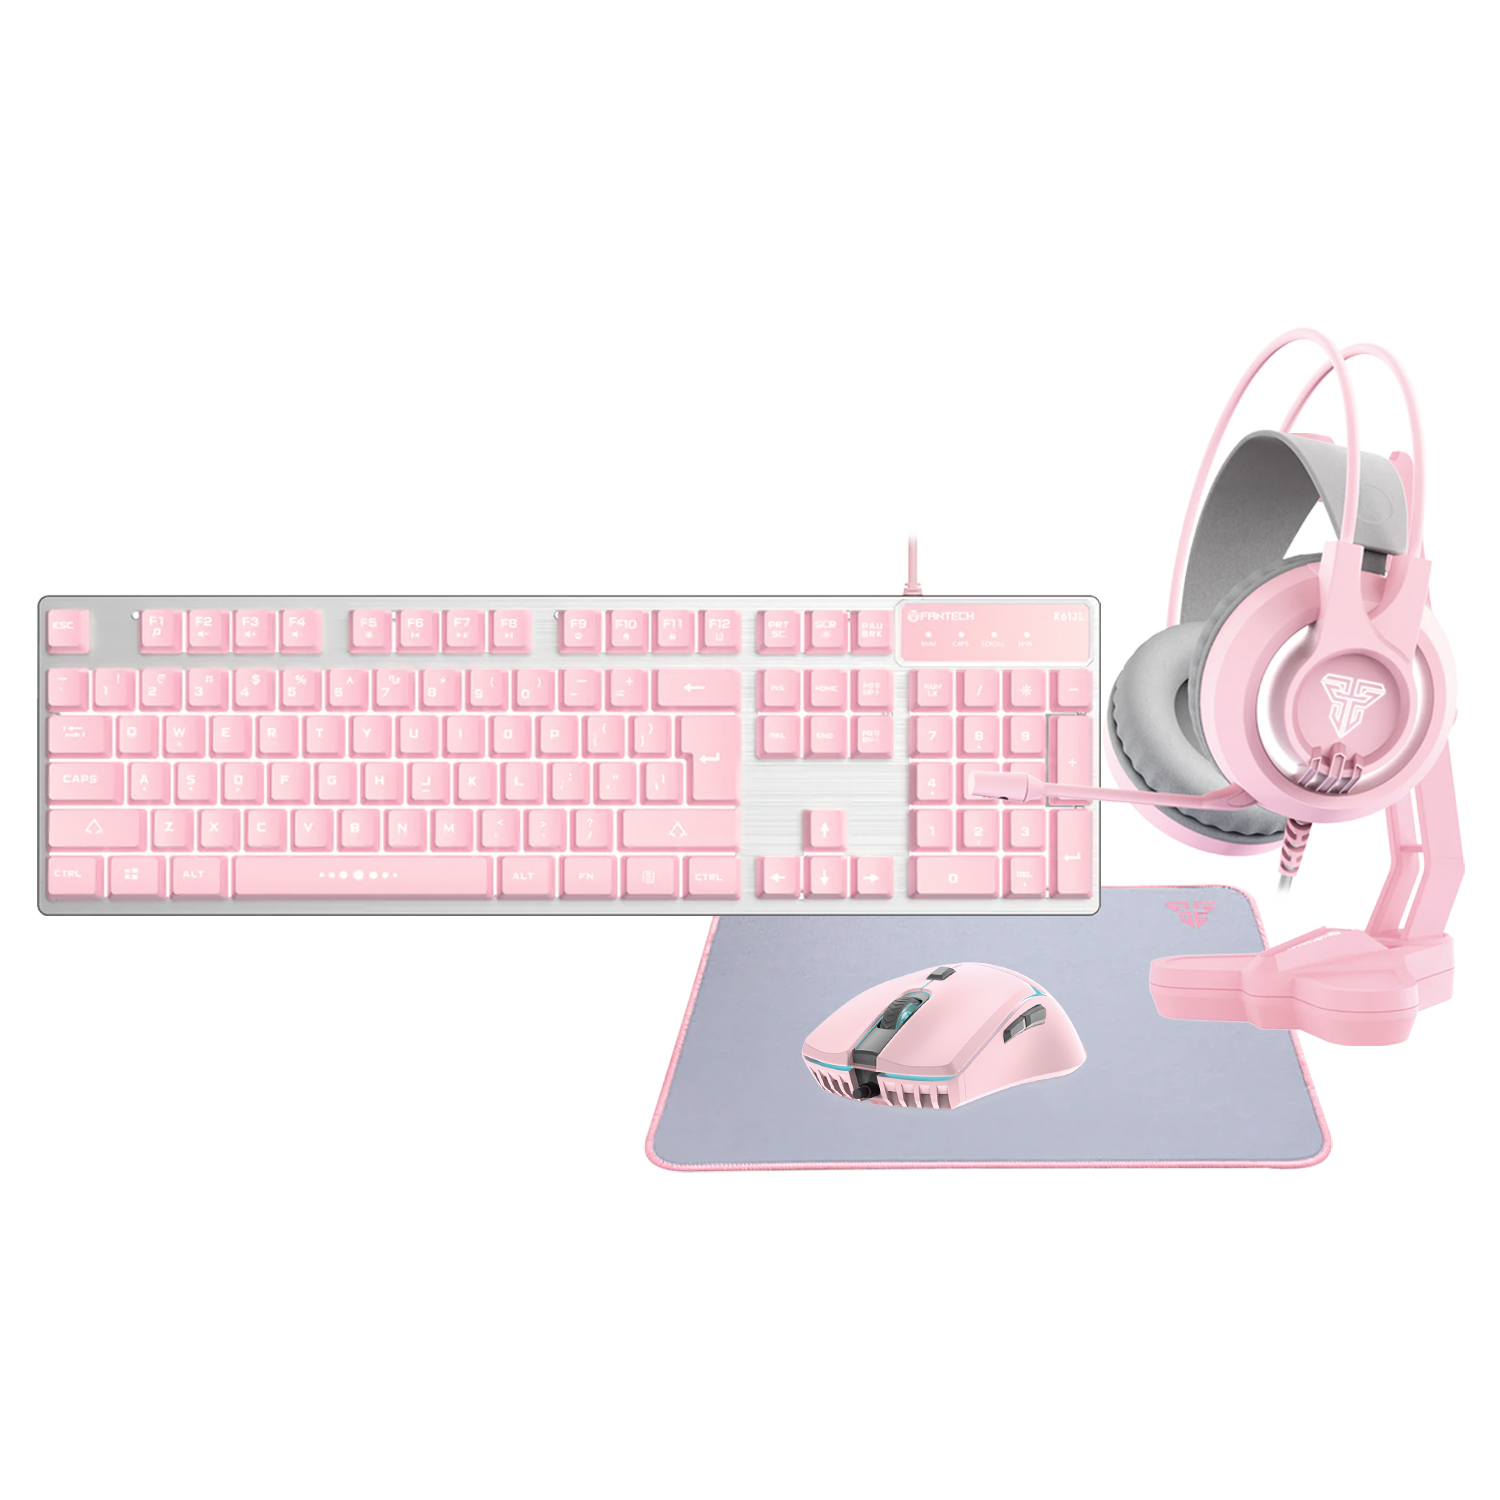 Fantech Sakura Edition Gaming 5-IN-1 Keyboard + Mouse +Mousepad + Headset + Stand Computer Pink Combo Set